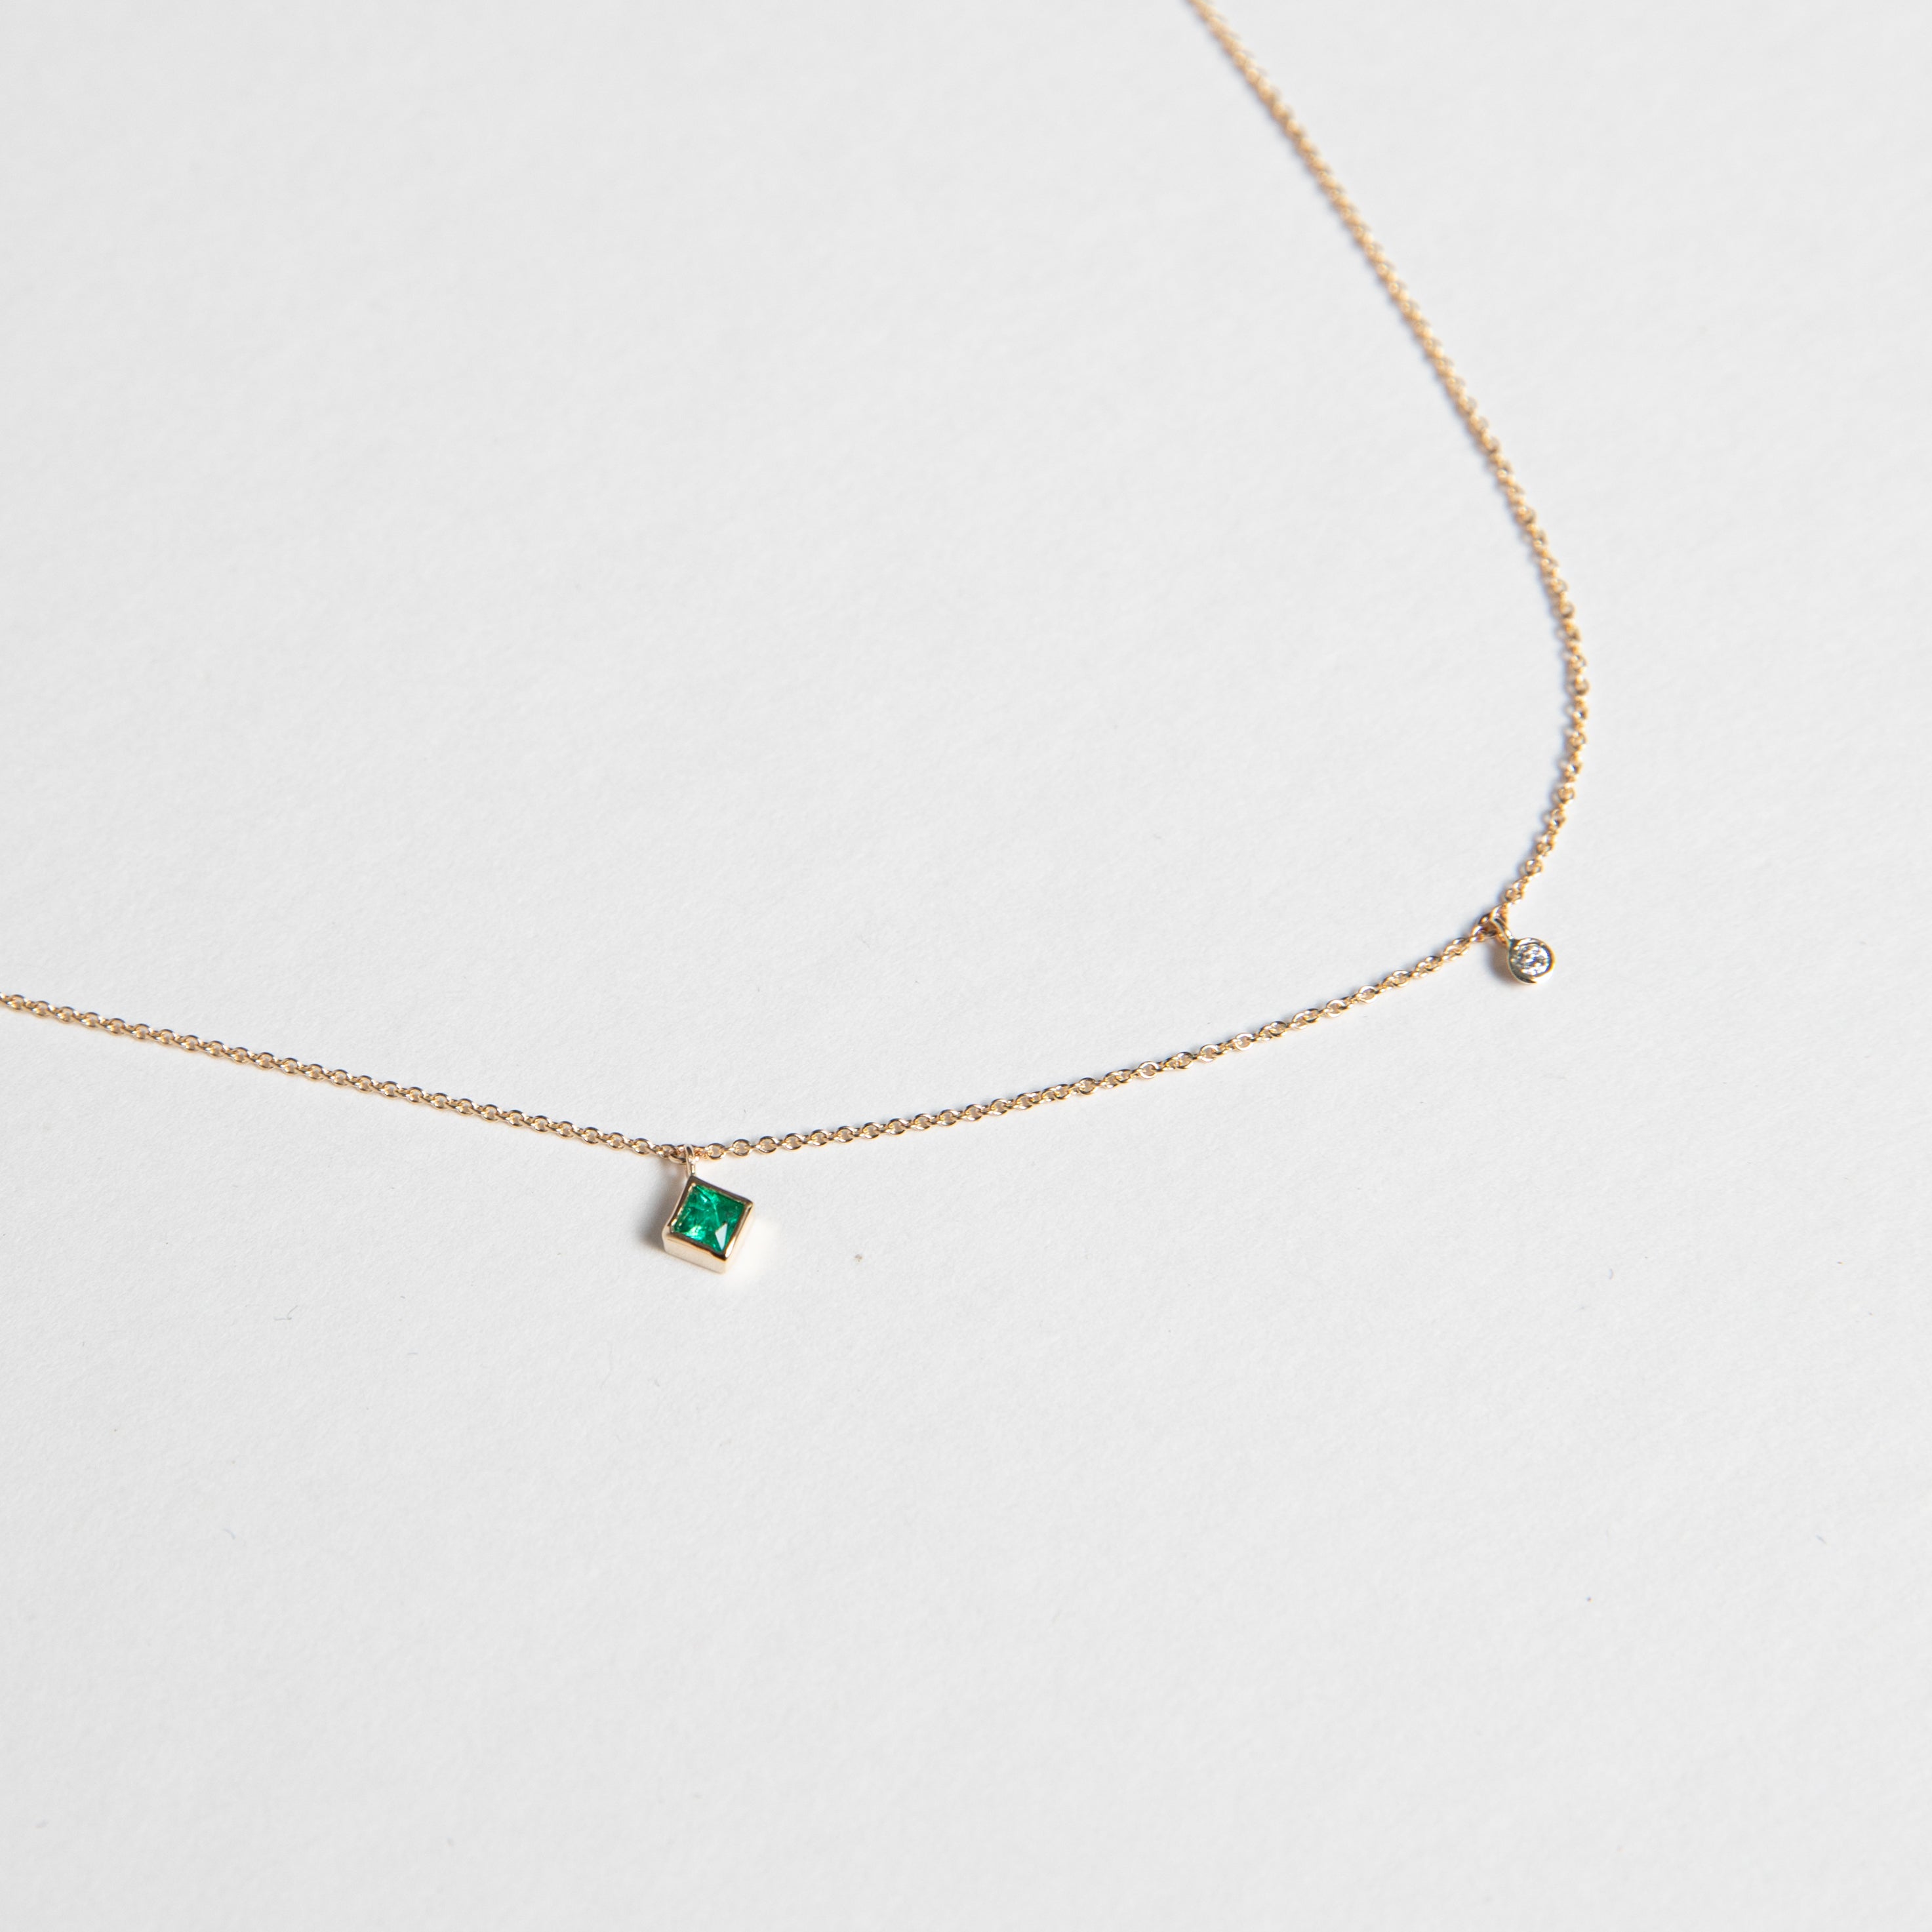 Ibi Alternative Necklace in 14k Gold set with Emerald By SHW Fine Jewelry NYC